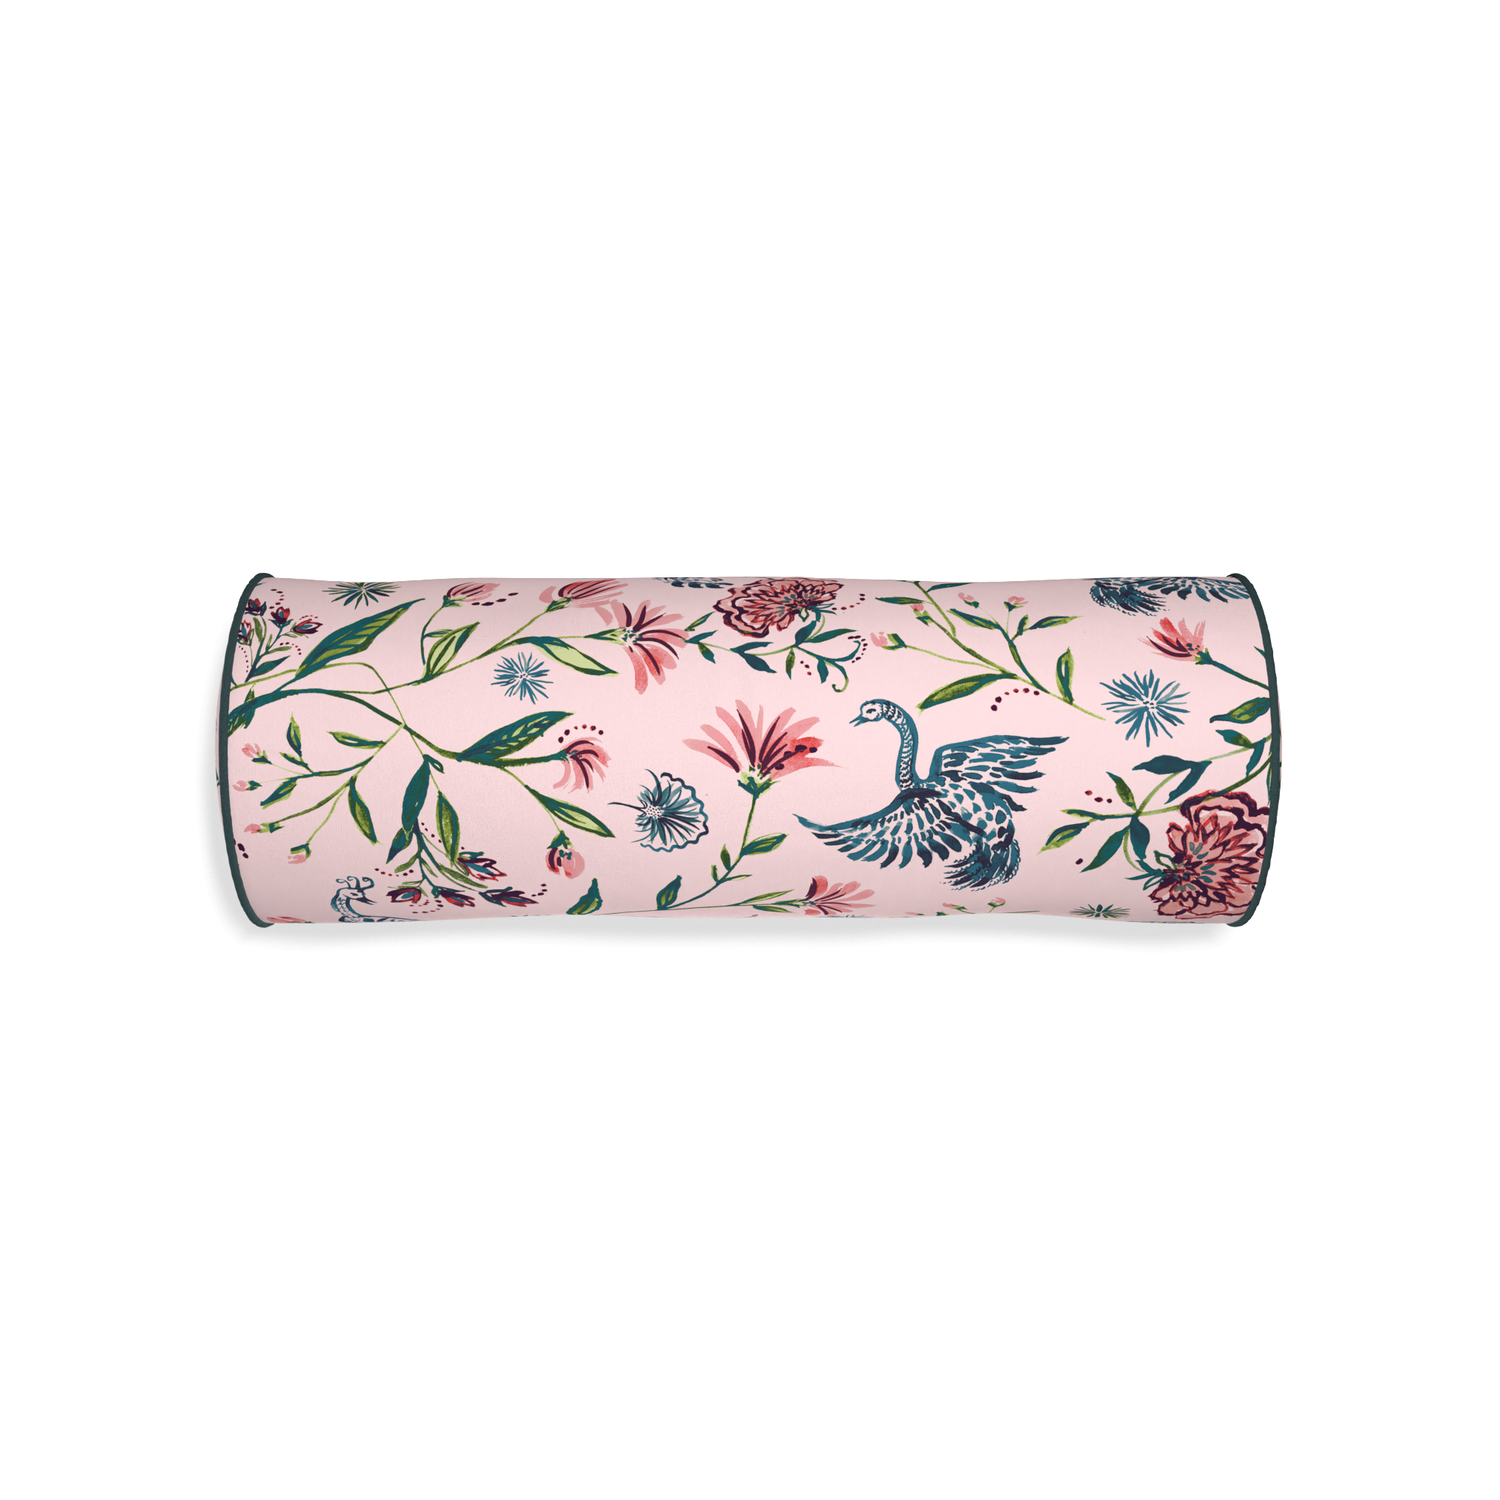 Bolster daphne rose custom rose chinoiseriepillow with p piping on white background